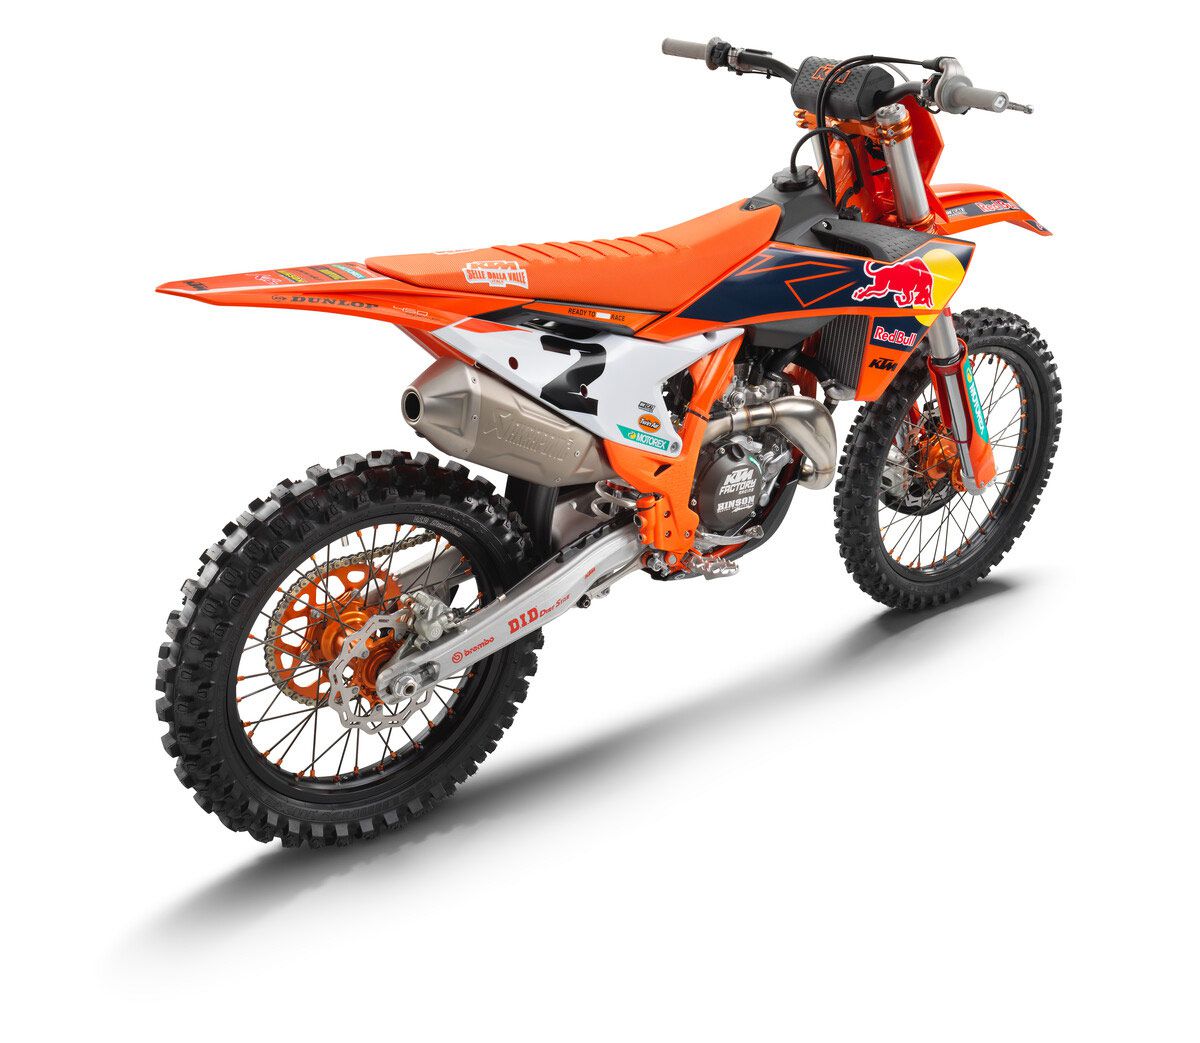 Bring on the bling. KTM’s 450 SX-F Factory Edition is tricked out and features an orange frame, an Akrapovič slip-on, factory start device, and factory seat, wheels, carbon-reinforced skid plate, triple clamps…the list goes on.